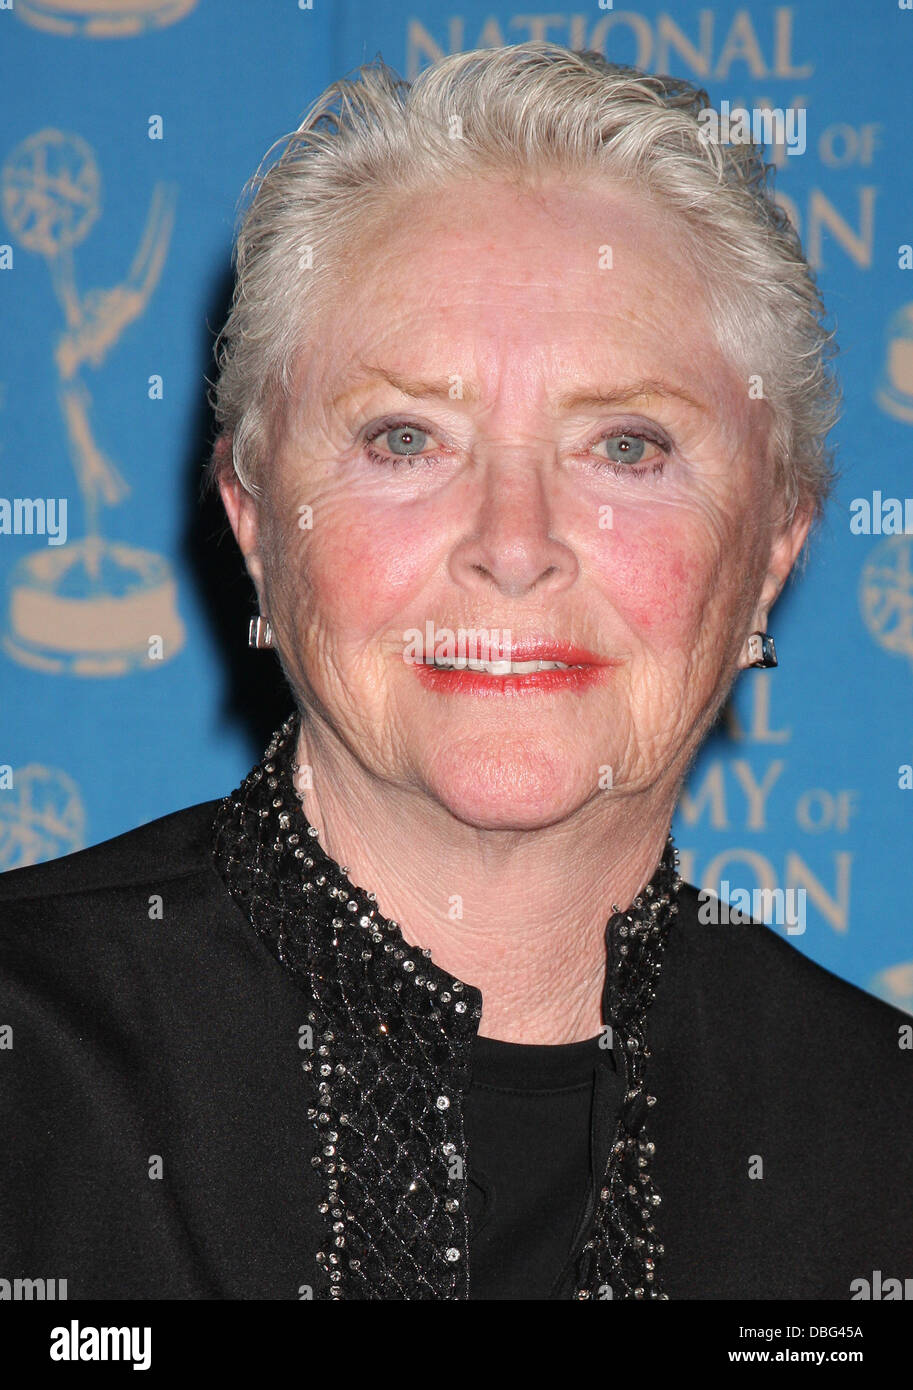 Susan Flannery The 38th Annual Daytime Creative Arts & Entertainment Emmy Awards at Westin Bonaventure Hotel  Los Angeles, California - 17.06.11 Stock Photo